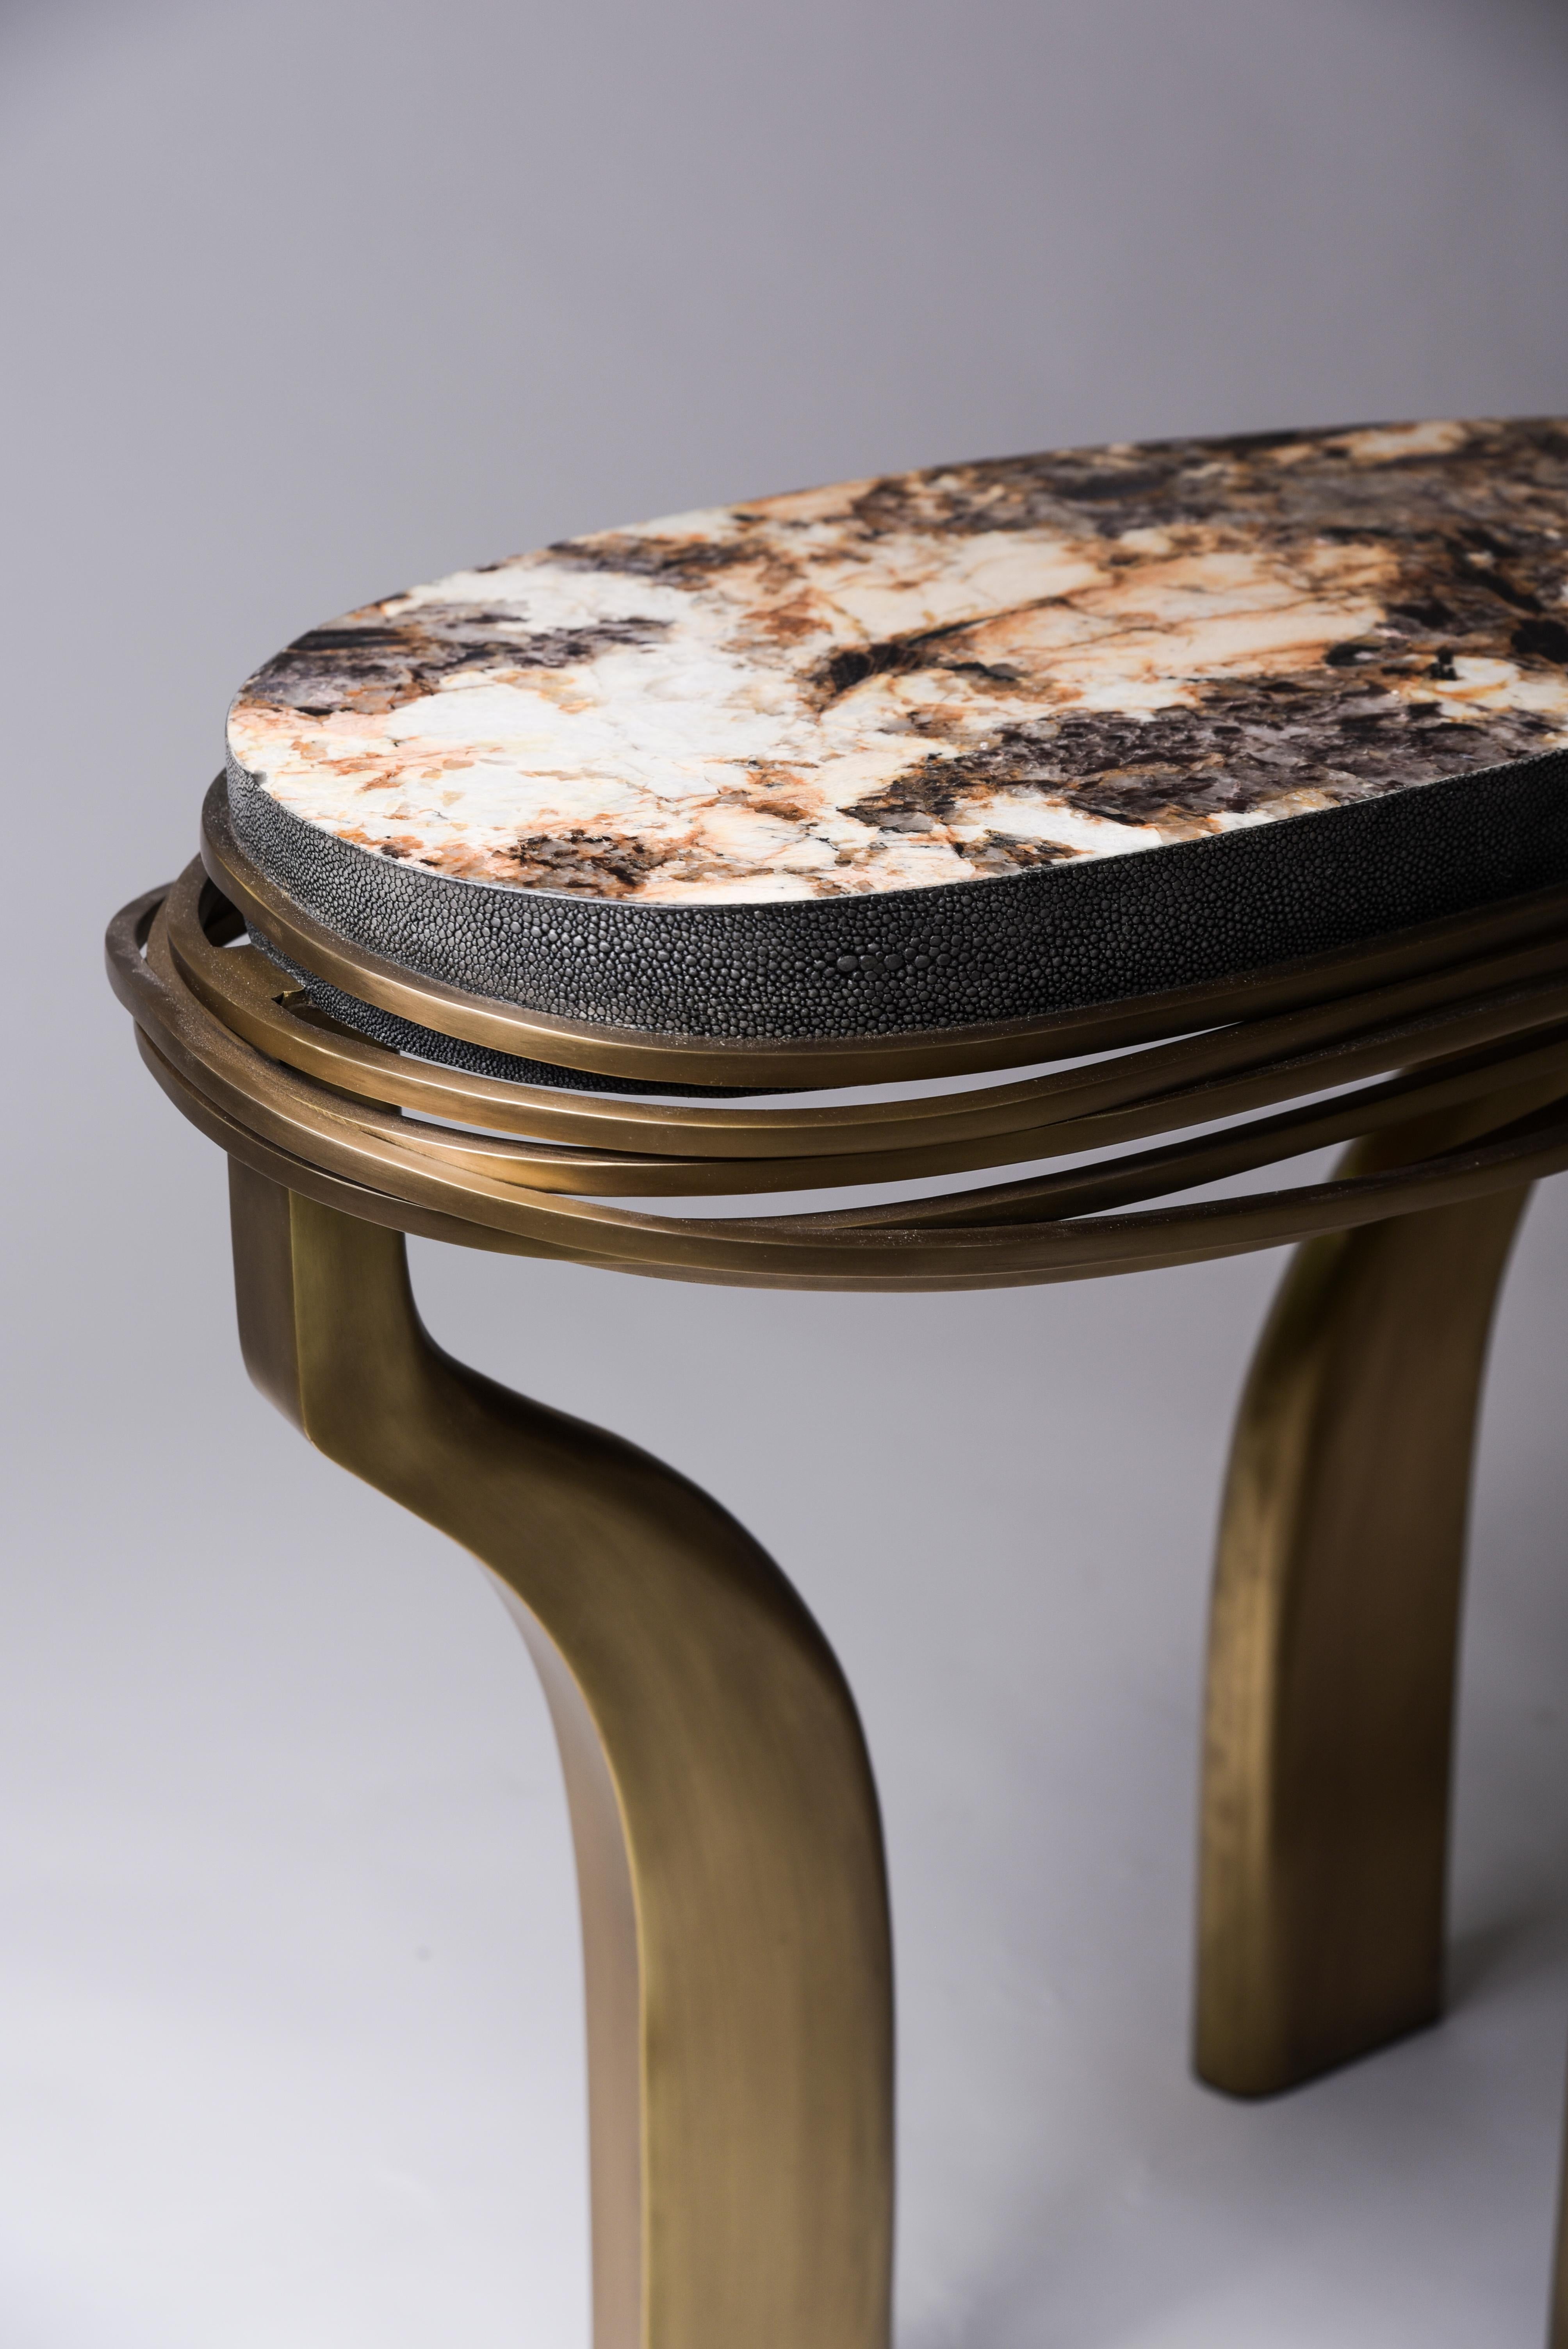 The galaxy side table in large is an iconic Kifu Paris piece. Whimsical, sculptural and bold this piece makes the ultimate accent piece in any space. The intricate bronze-patina brass rings encircle the semi-precious stone (Hwana) inlaid top. The